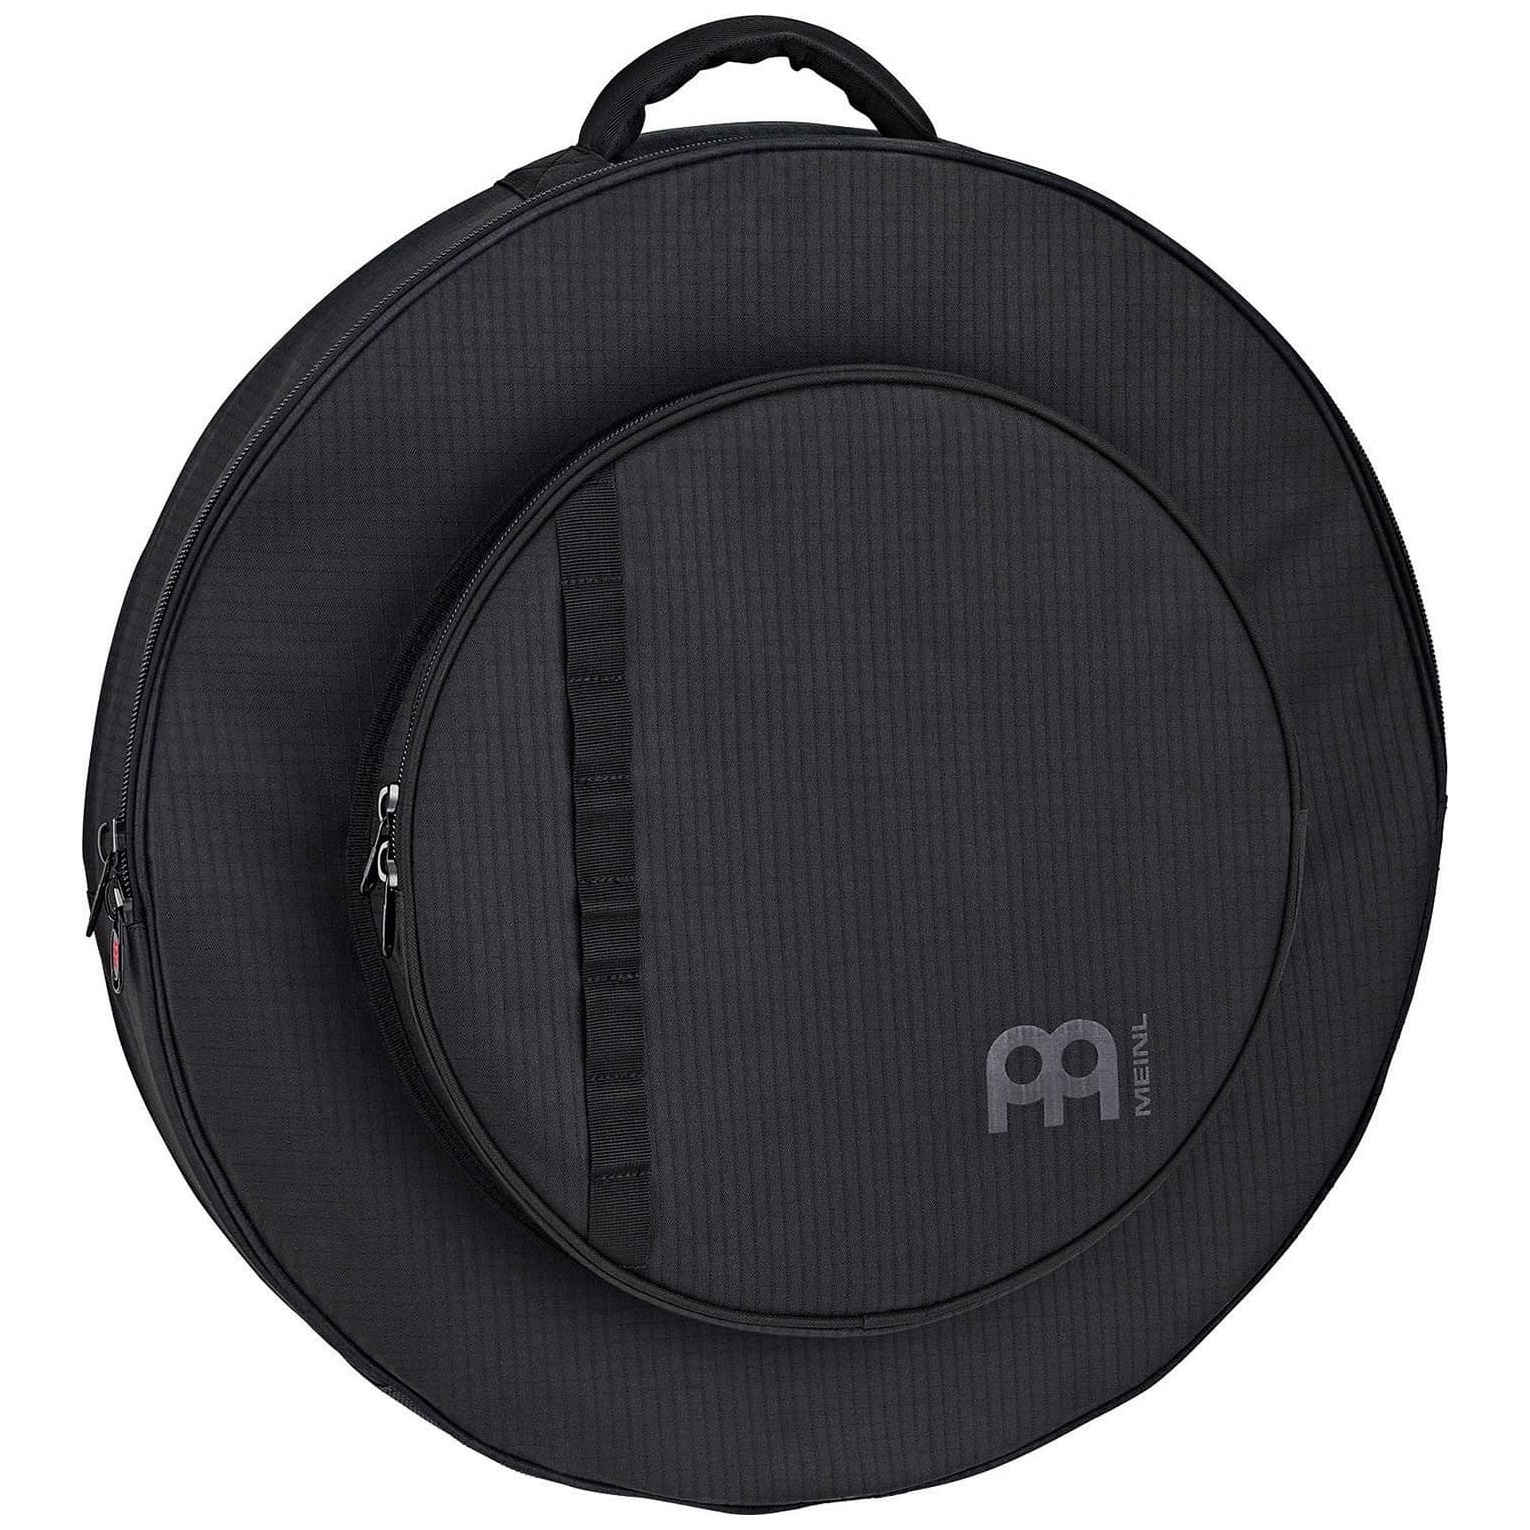 Meinl Cymbals MCB22CR 22" Carbon Ripstop Cymbal Bag